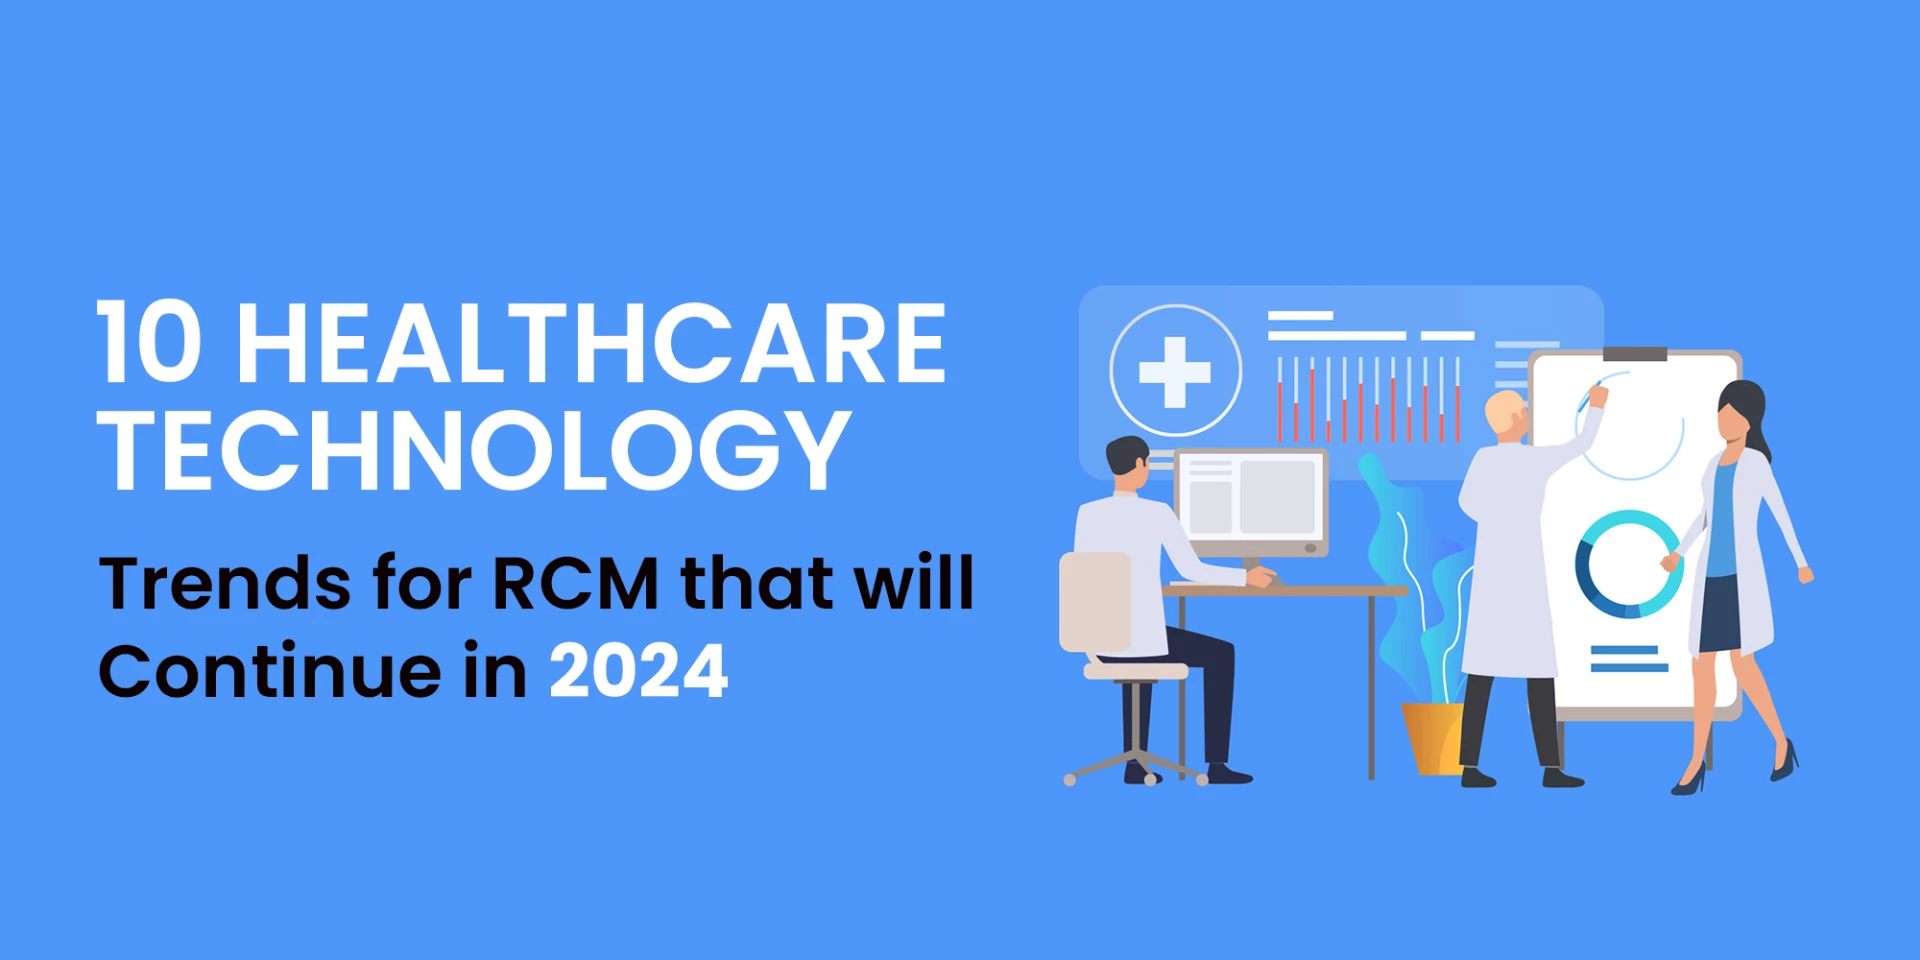 Healthcare technology trends 2024